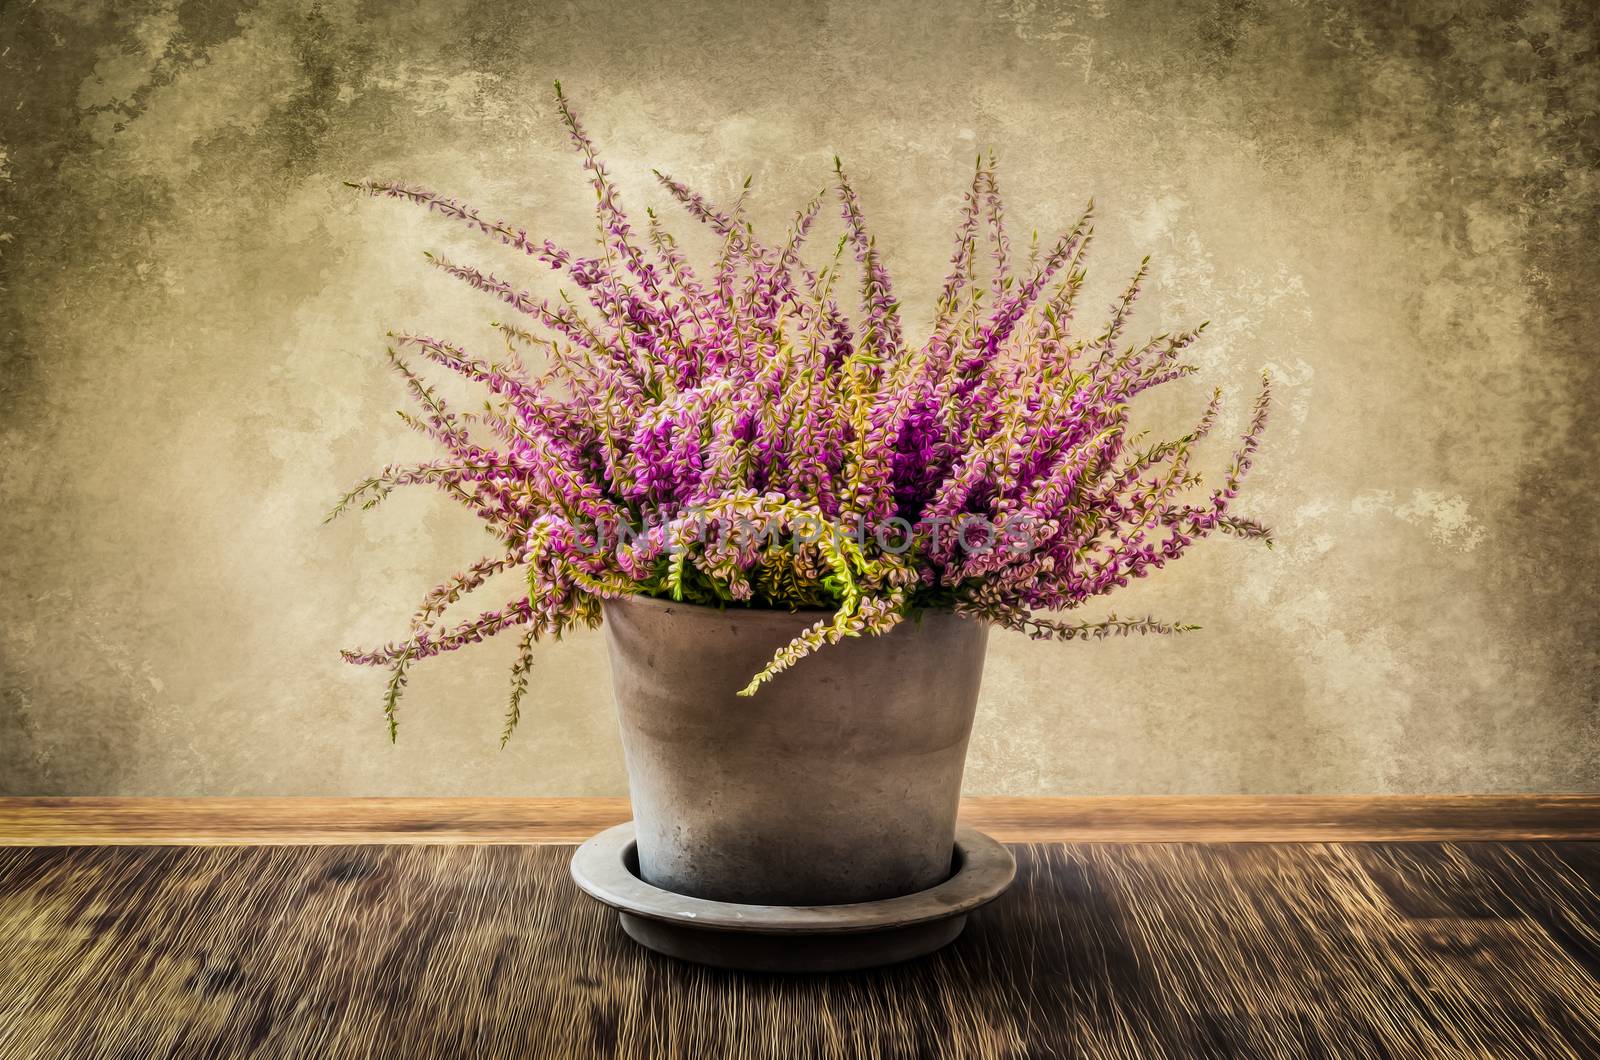 Post-process painting of nice heather flower in pot by martinm303